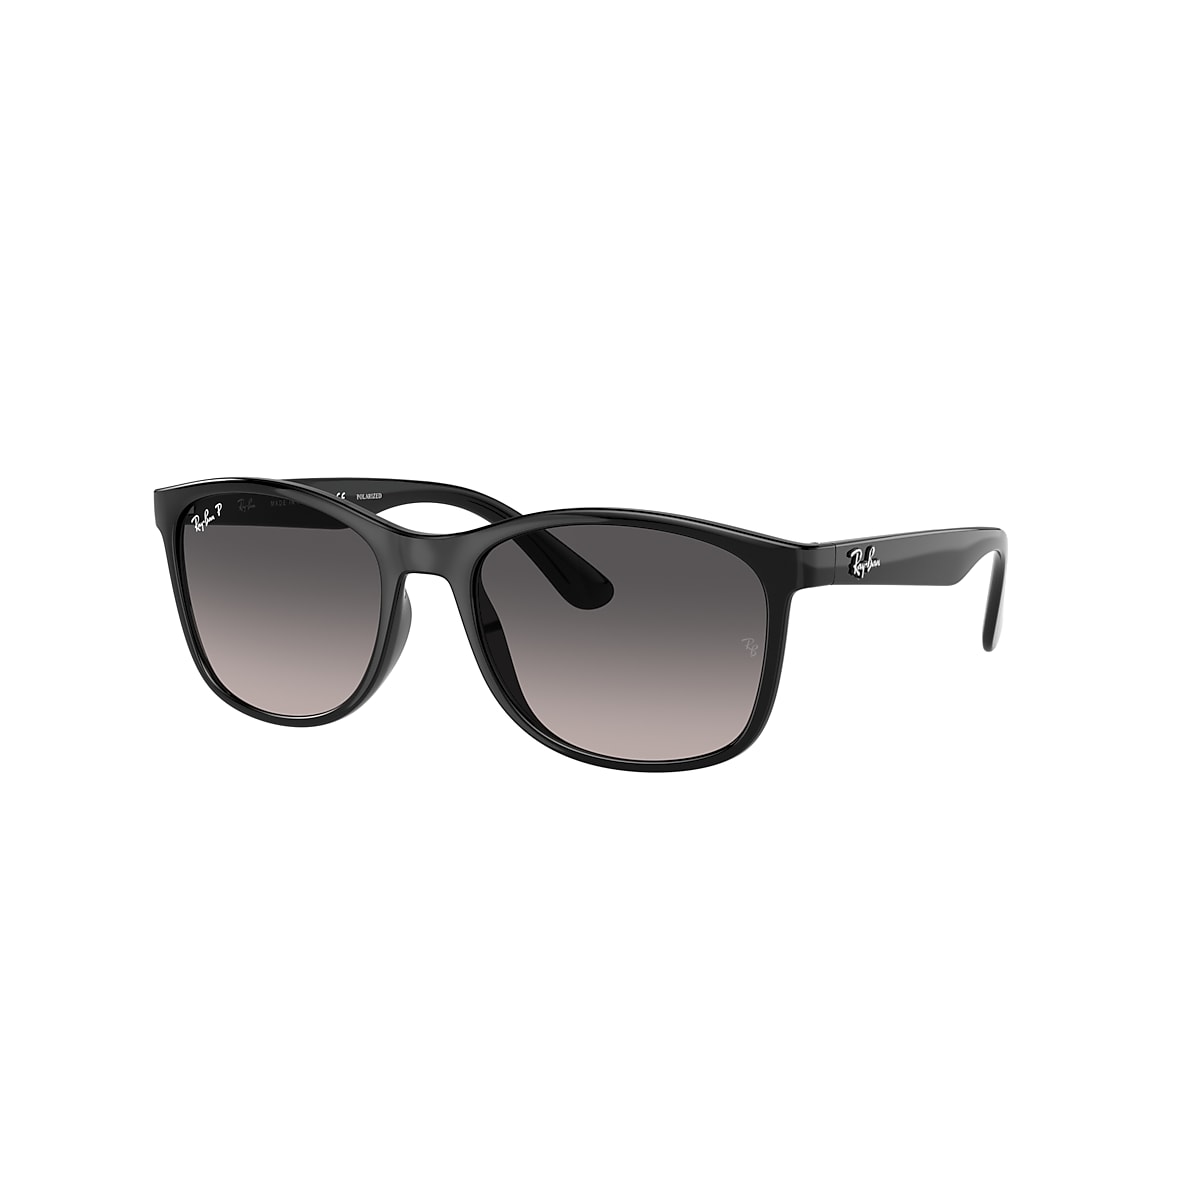 RB4374 Sunglasses in Black and Grey - RB4374F | Ray-Ban® US